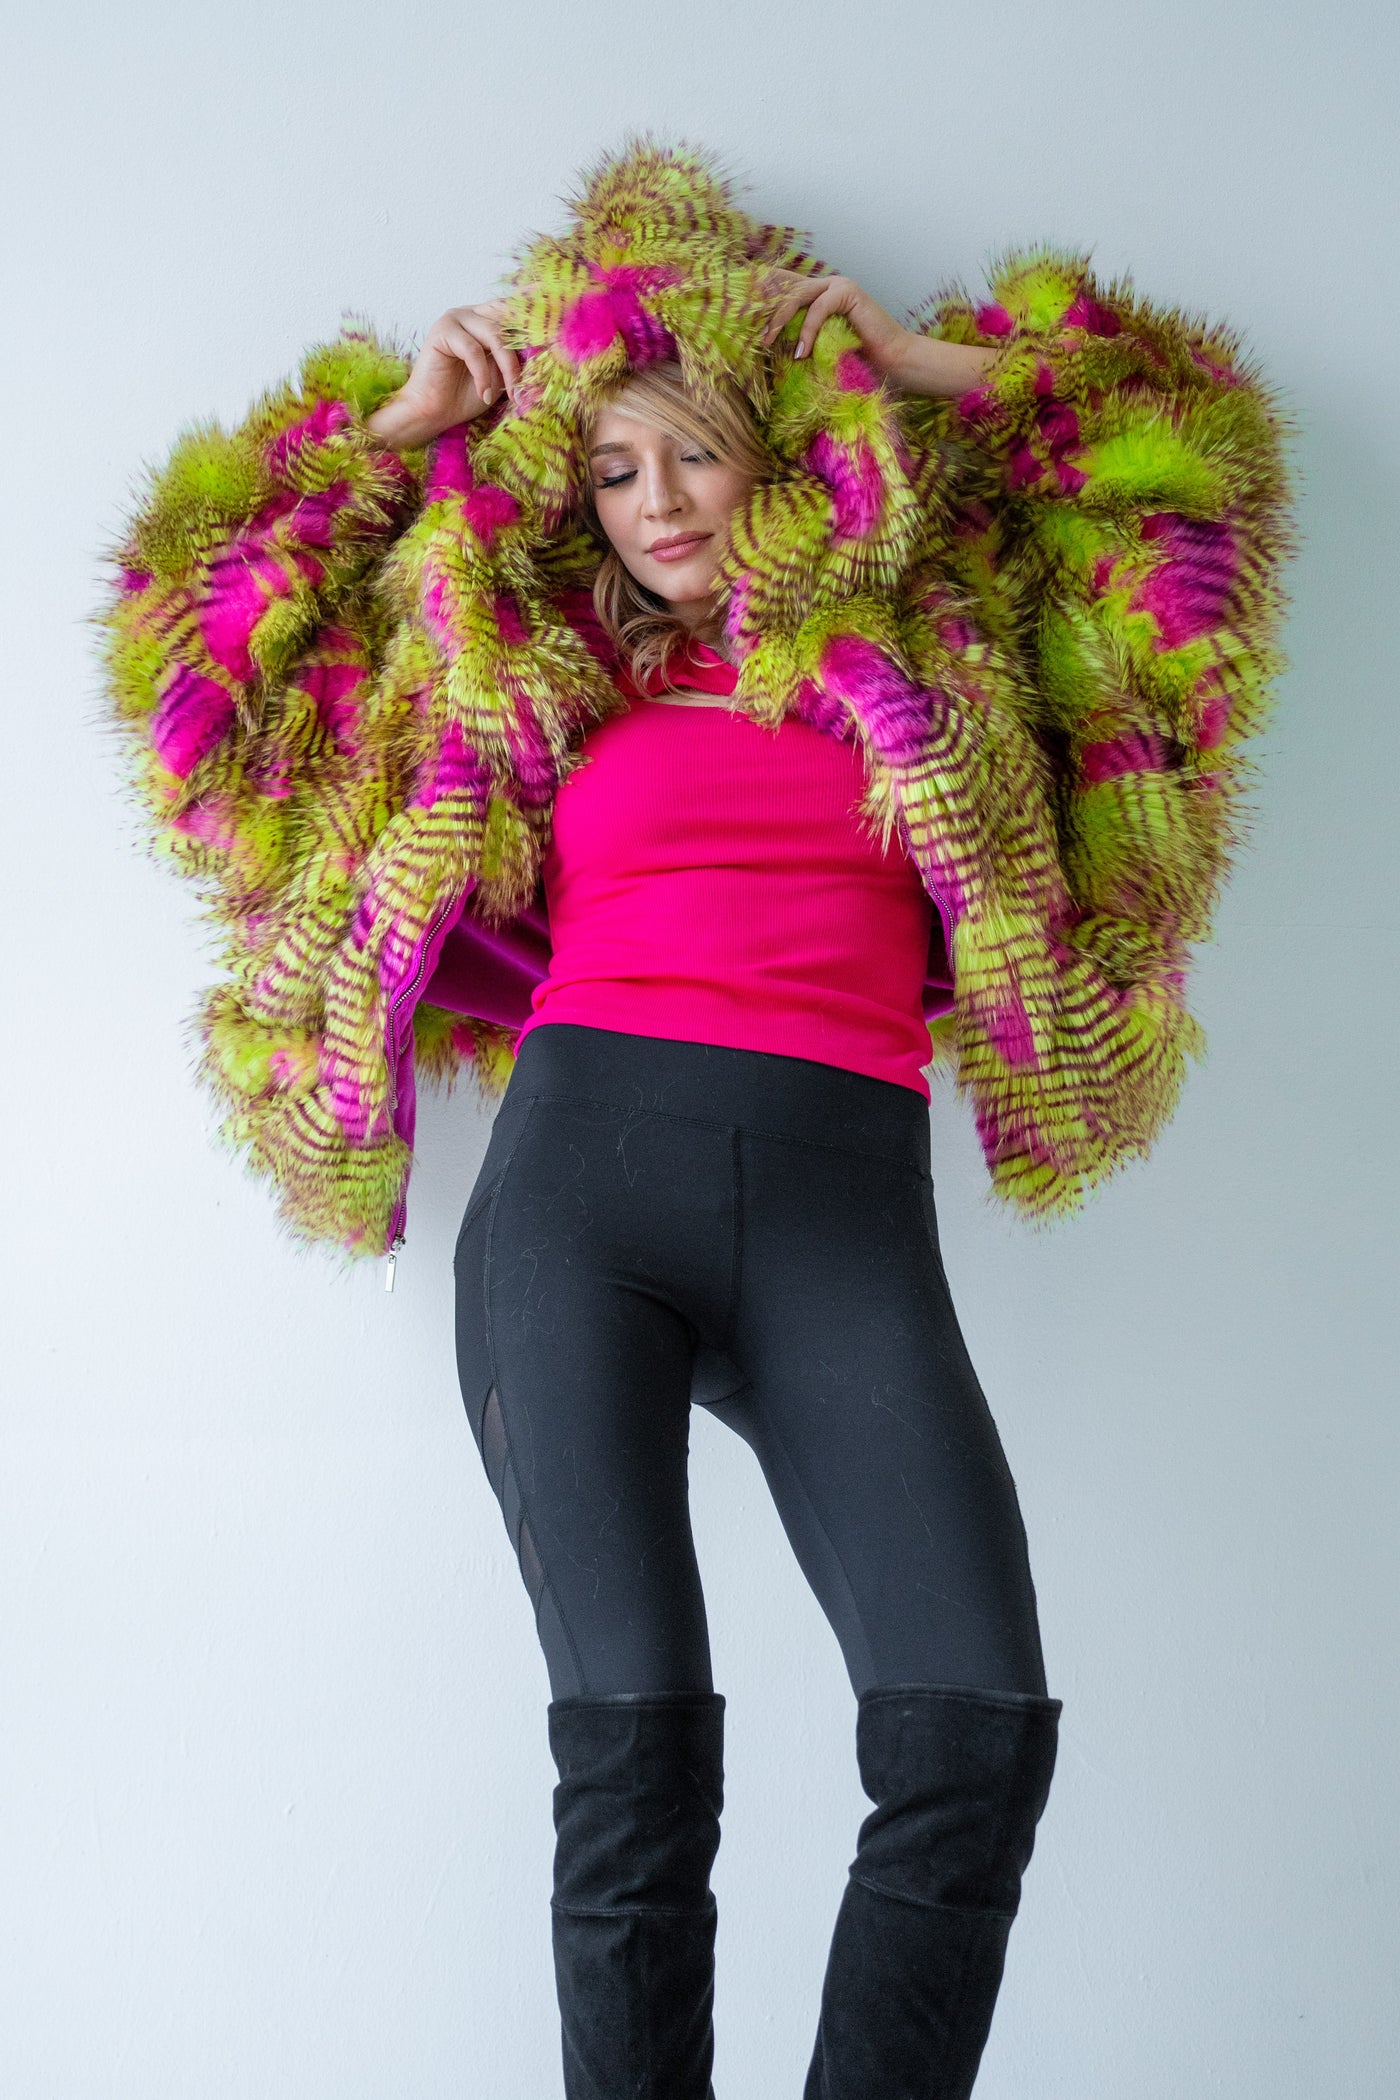 Women's Snuggle Coat in "Pink Lime Feather"